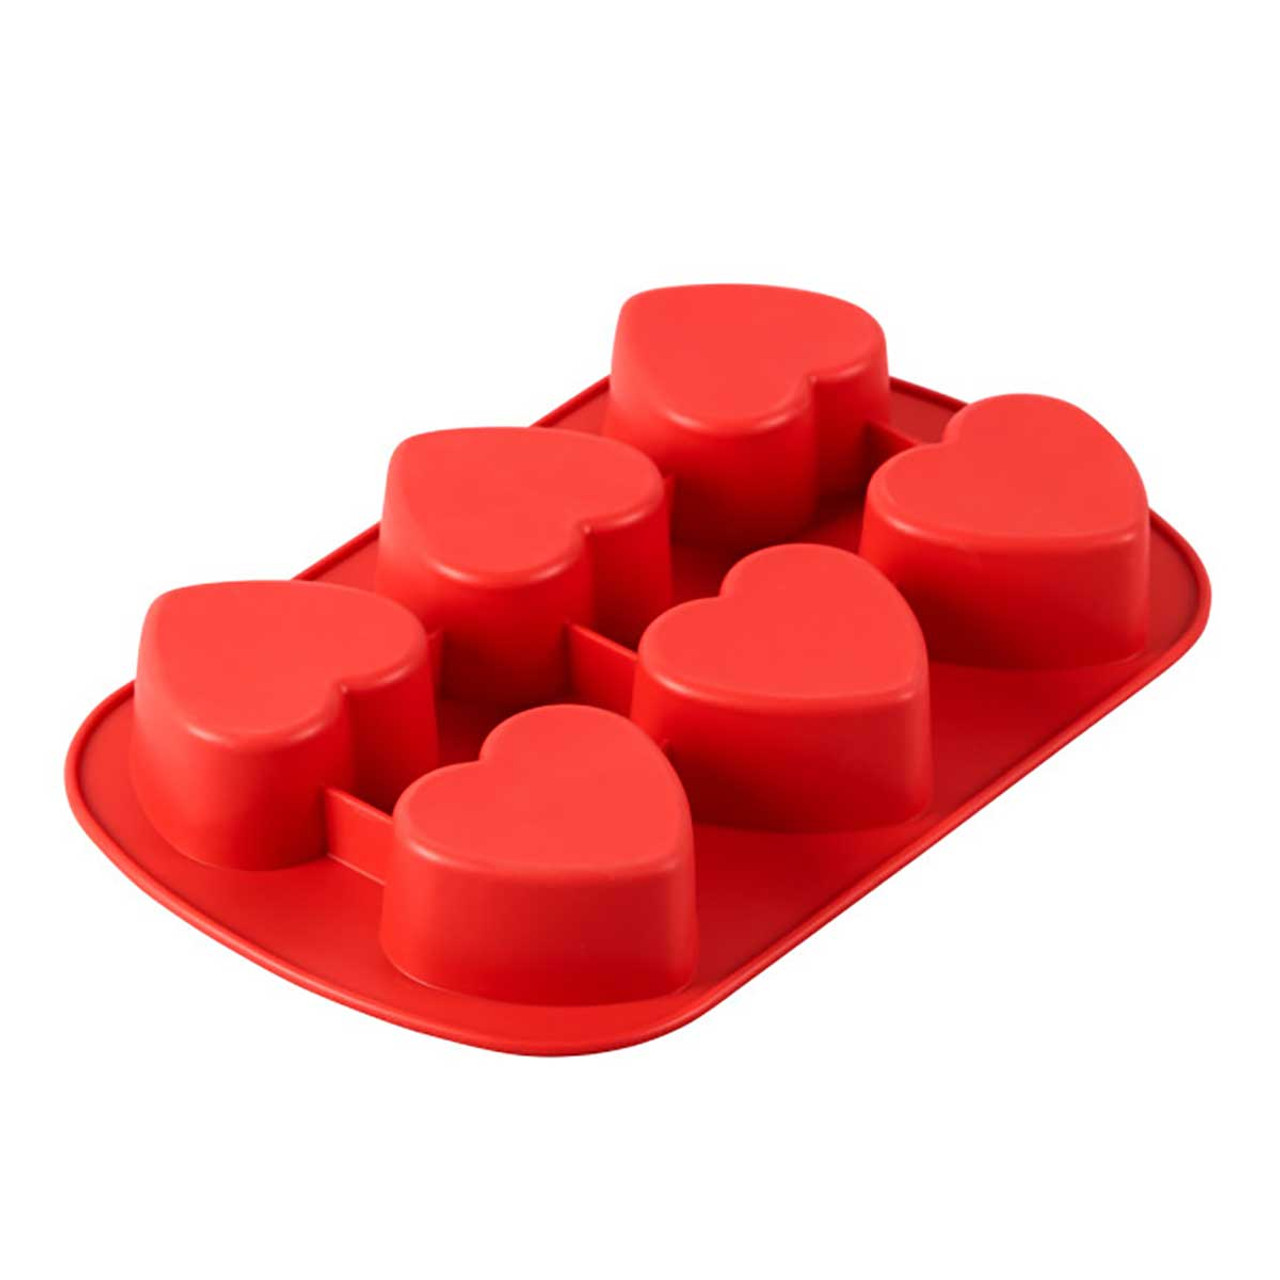 Heart Shaped Silicone Mold, 6 Holes Non Stick Heart Cake Pop Mold